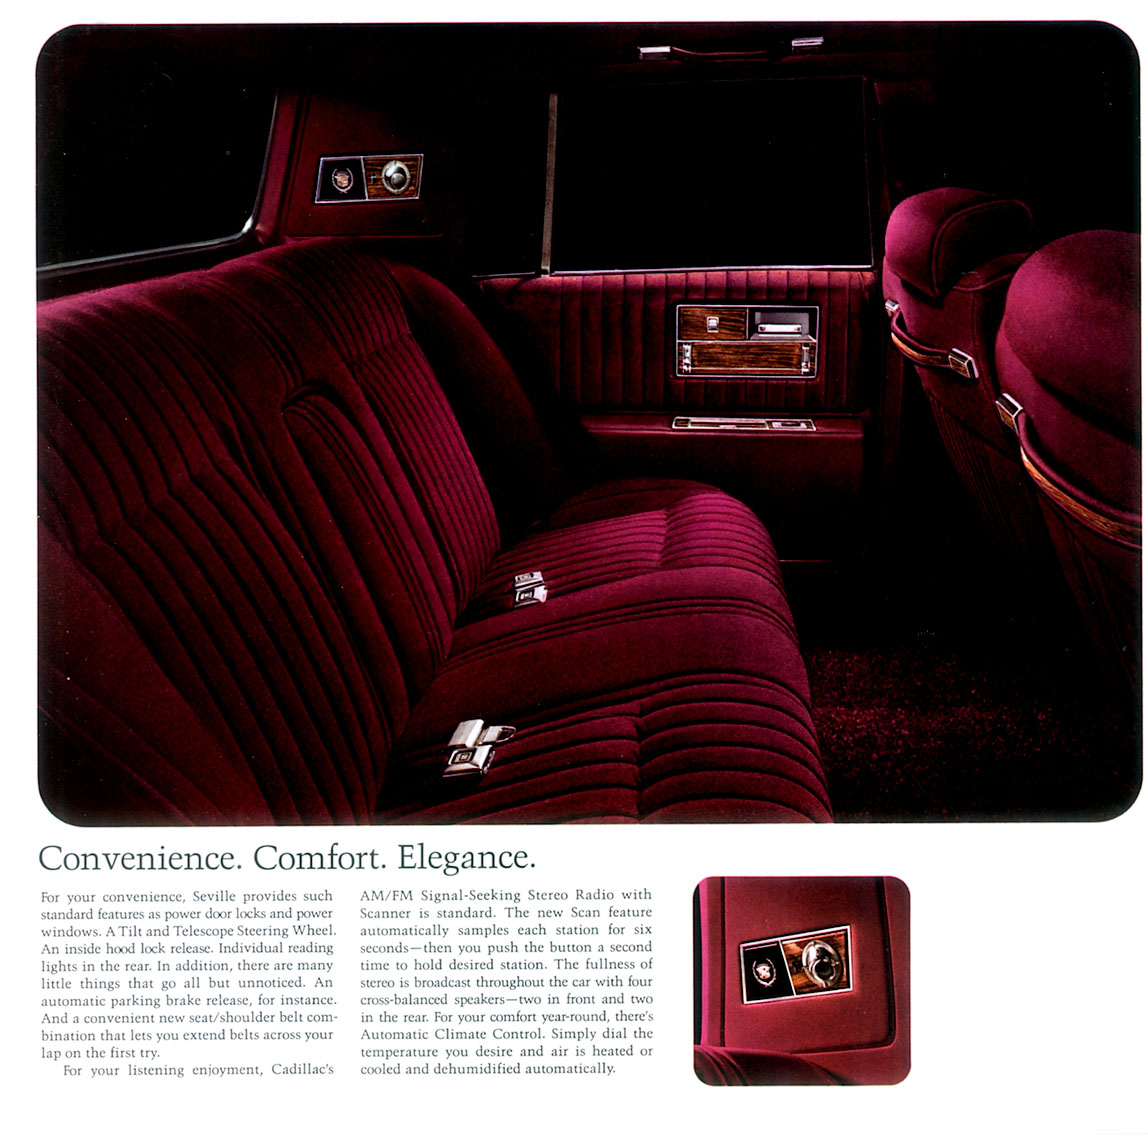 1977 Cadillac Seville Brochure Page 8